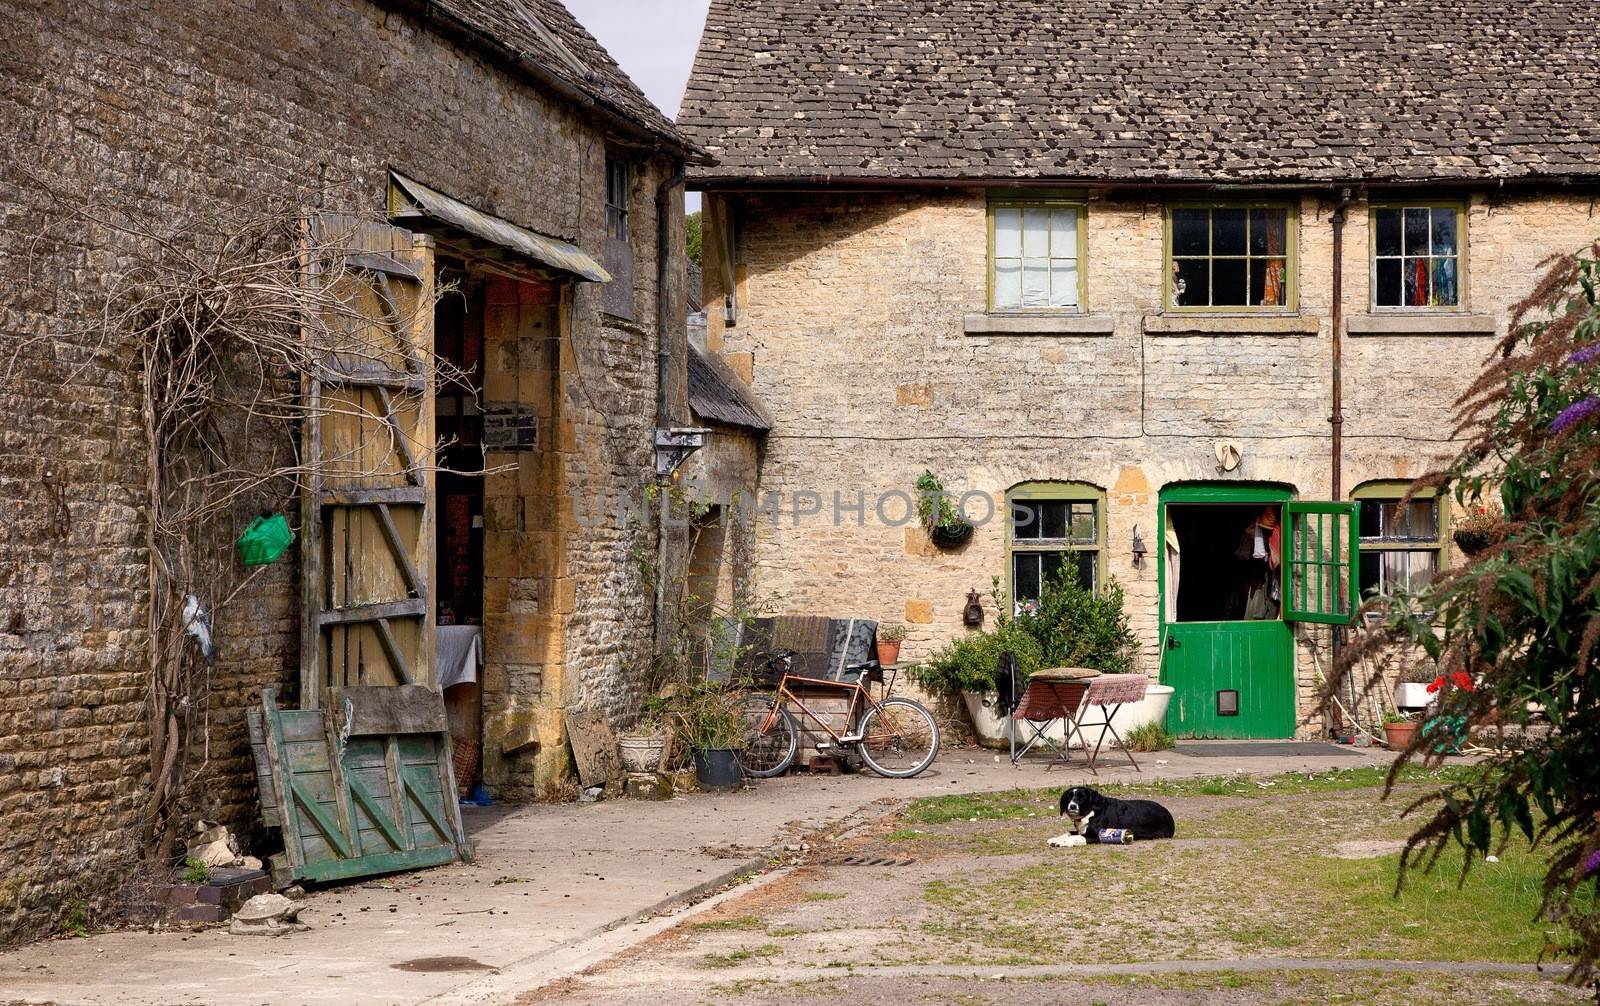 Traditional Cotswold farmyard with sheep dog, Stow on the Wold, Gloucestershire, England.